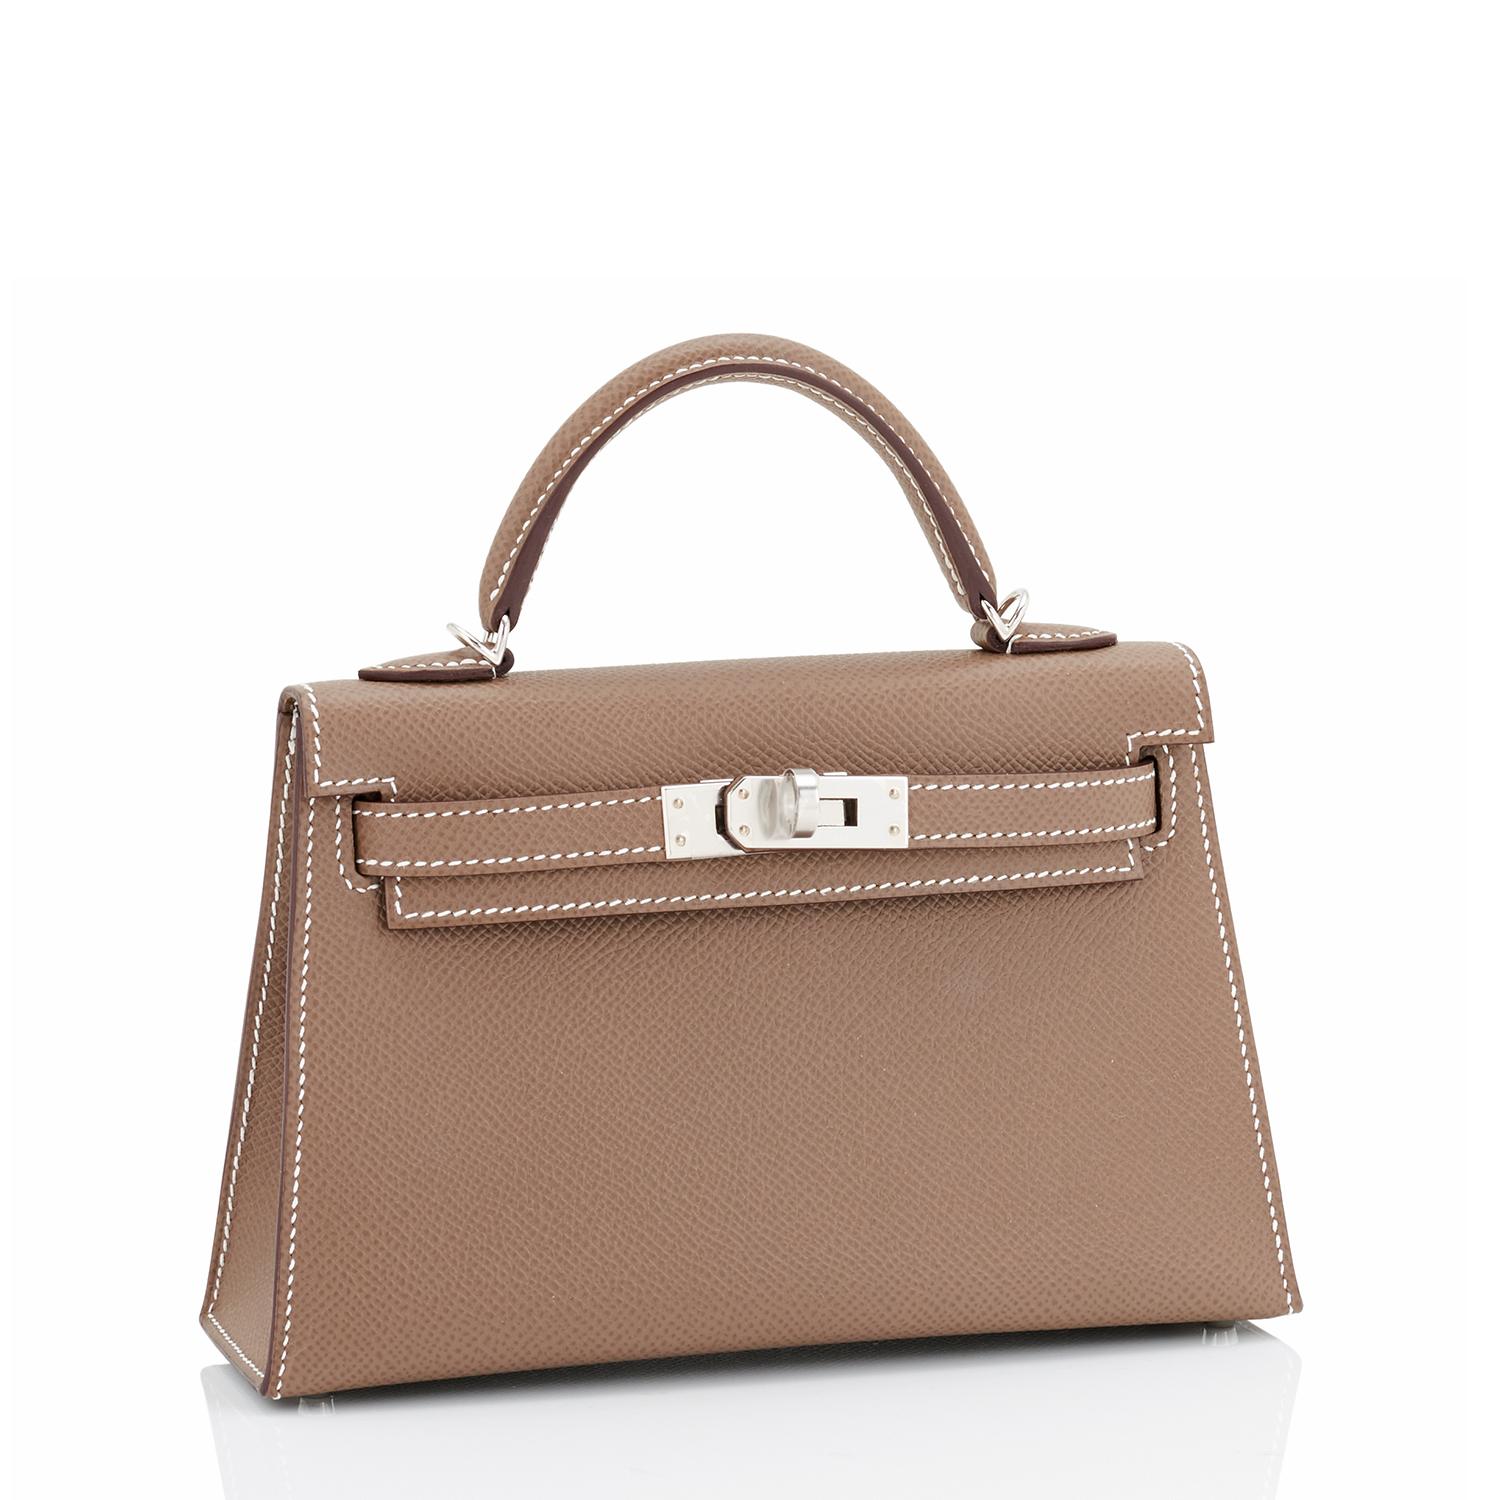 Hermes Mini Etoupe Kelly 20cm Epsom Bag New in Box
Brand New in Box.  Store Fresh. Pristine Condition (with plastic on hardware)
Perfect gift! Comes full set with shoulder strap, sleepers, and orange Hermes box.
Etoupe (Taupe) is the quintessential